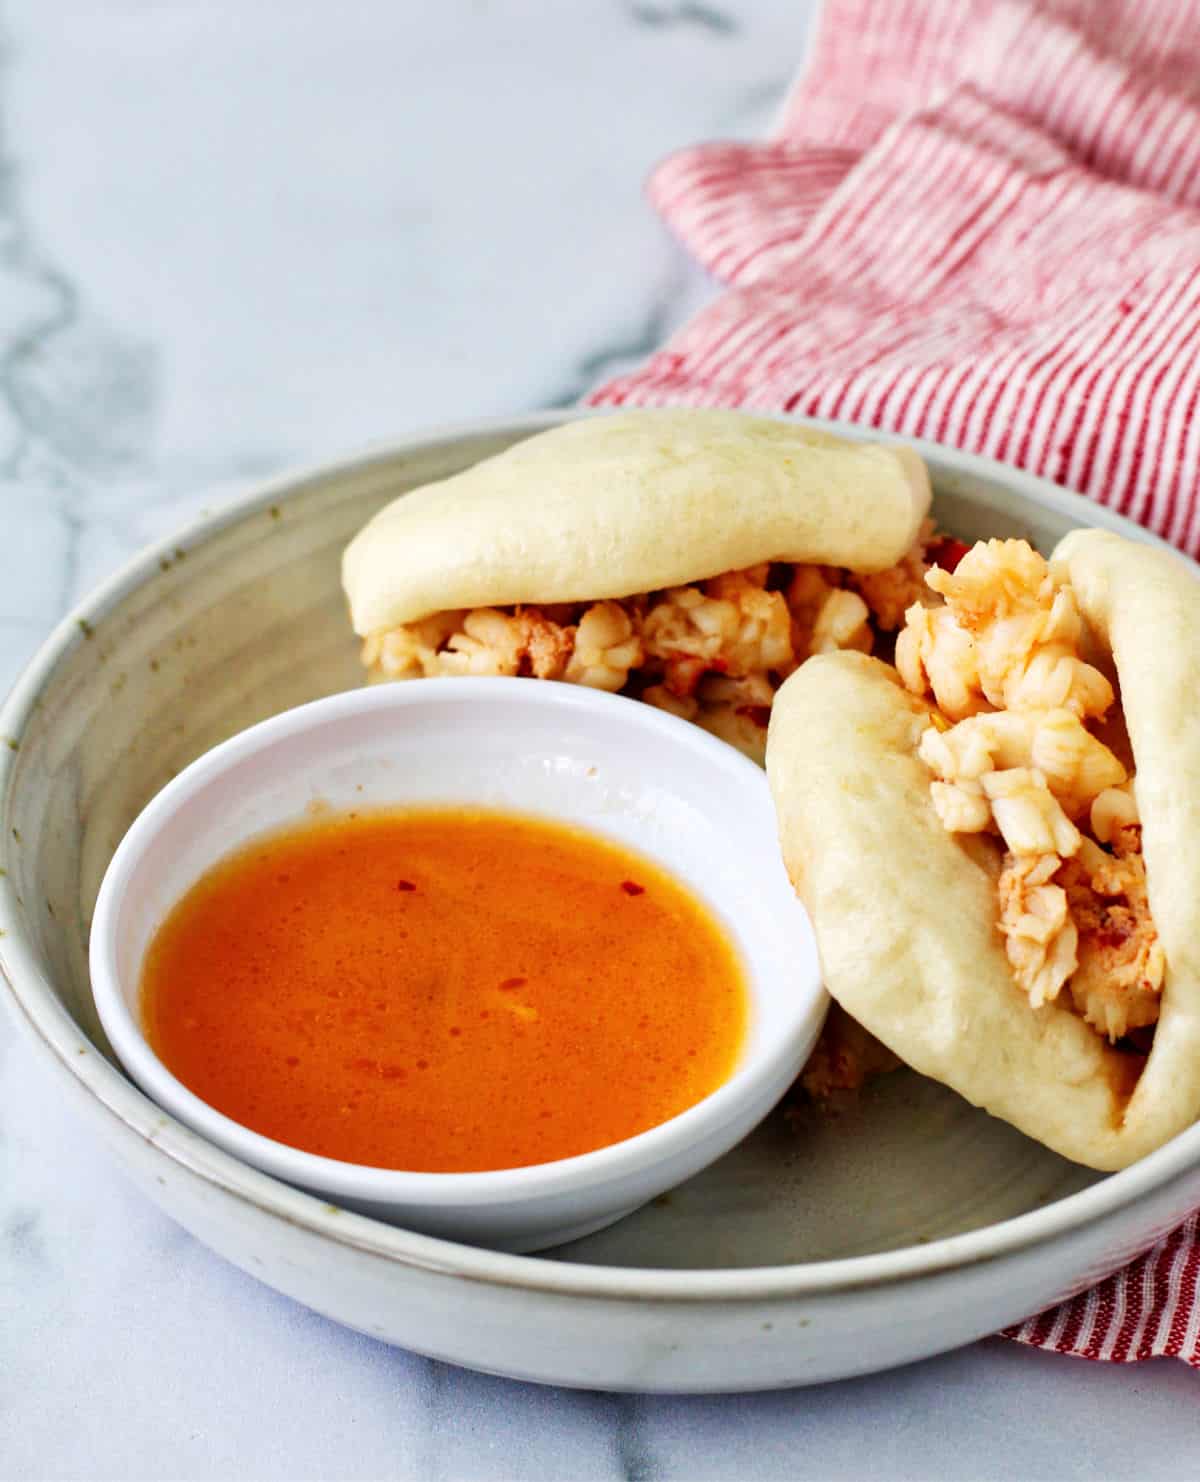 Spicy Lobster Bao with butter dipping sauce in the bowl.